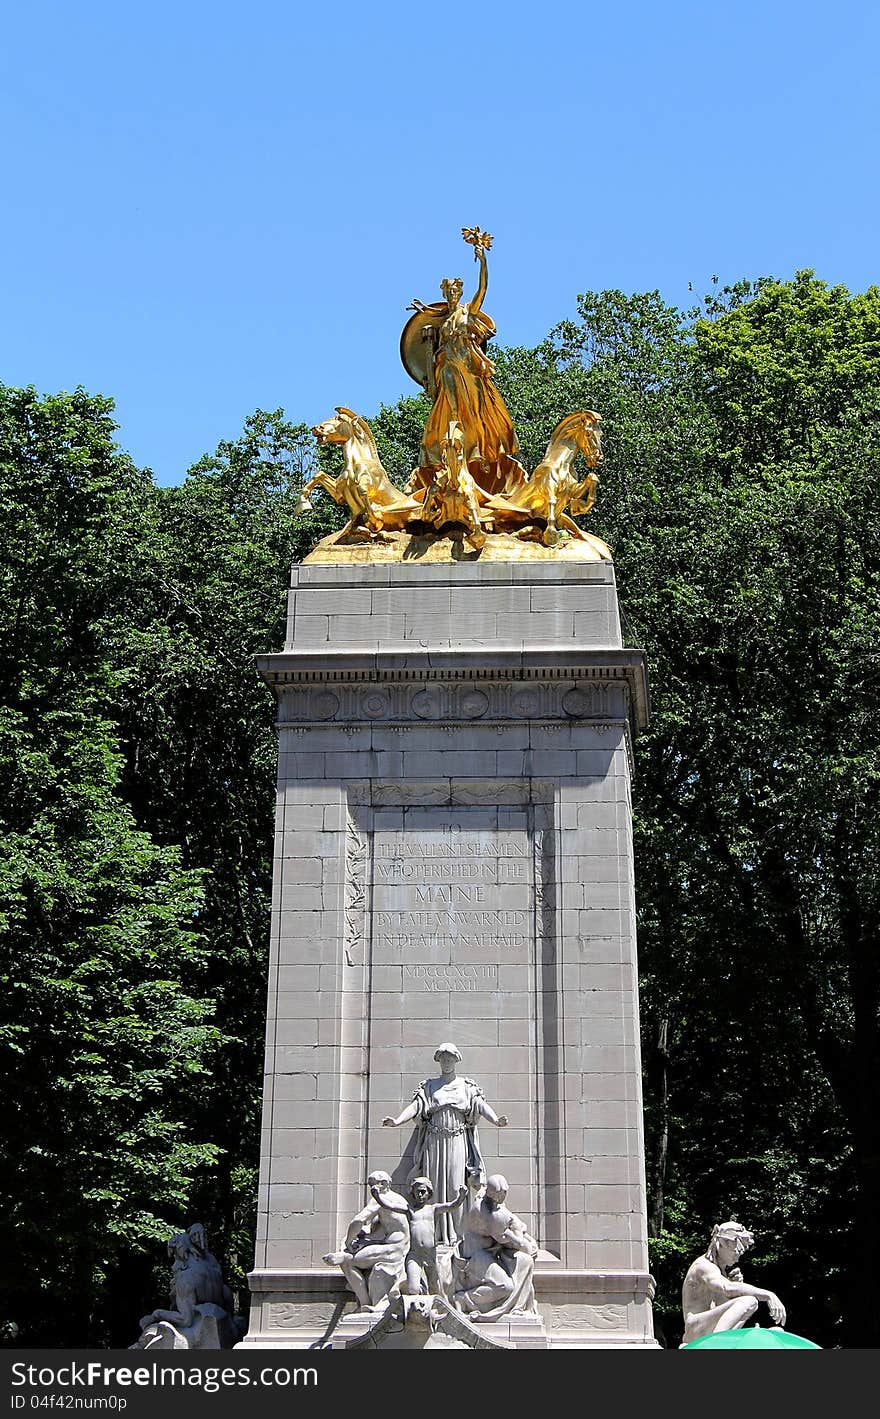 A statue dedicated to the seamen that lst their lives in the Maine, located at the lower west side corner of Central Park New York City. A statue dedicated to the seamen that lst their lives in the Maine, located at the lower west side corner of Central Park New York City